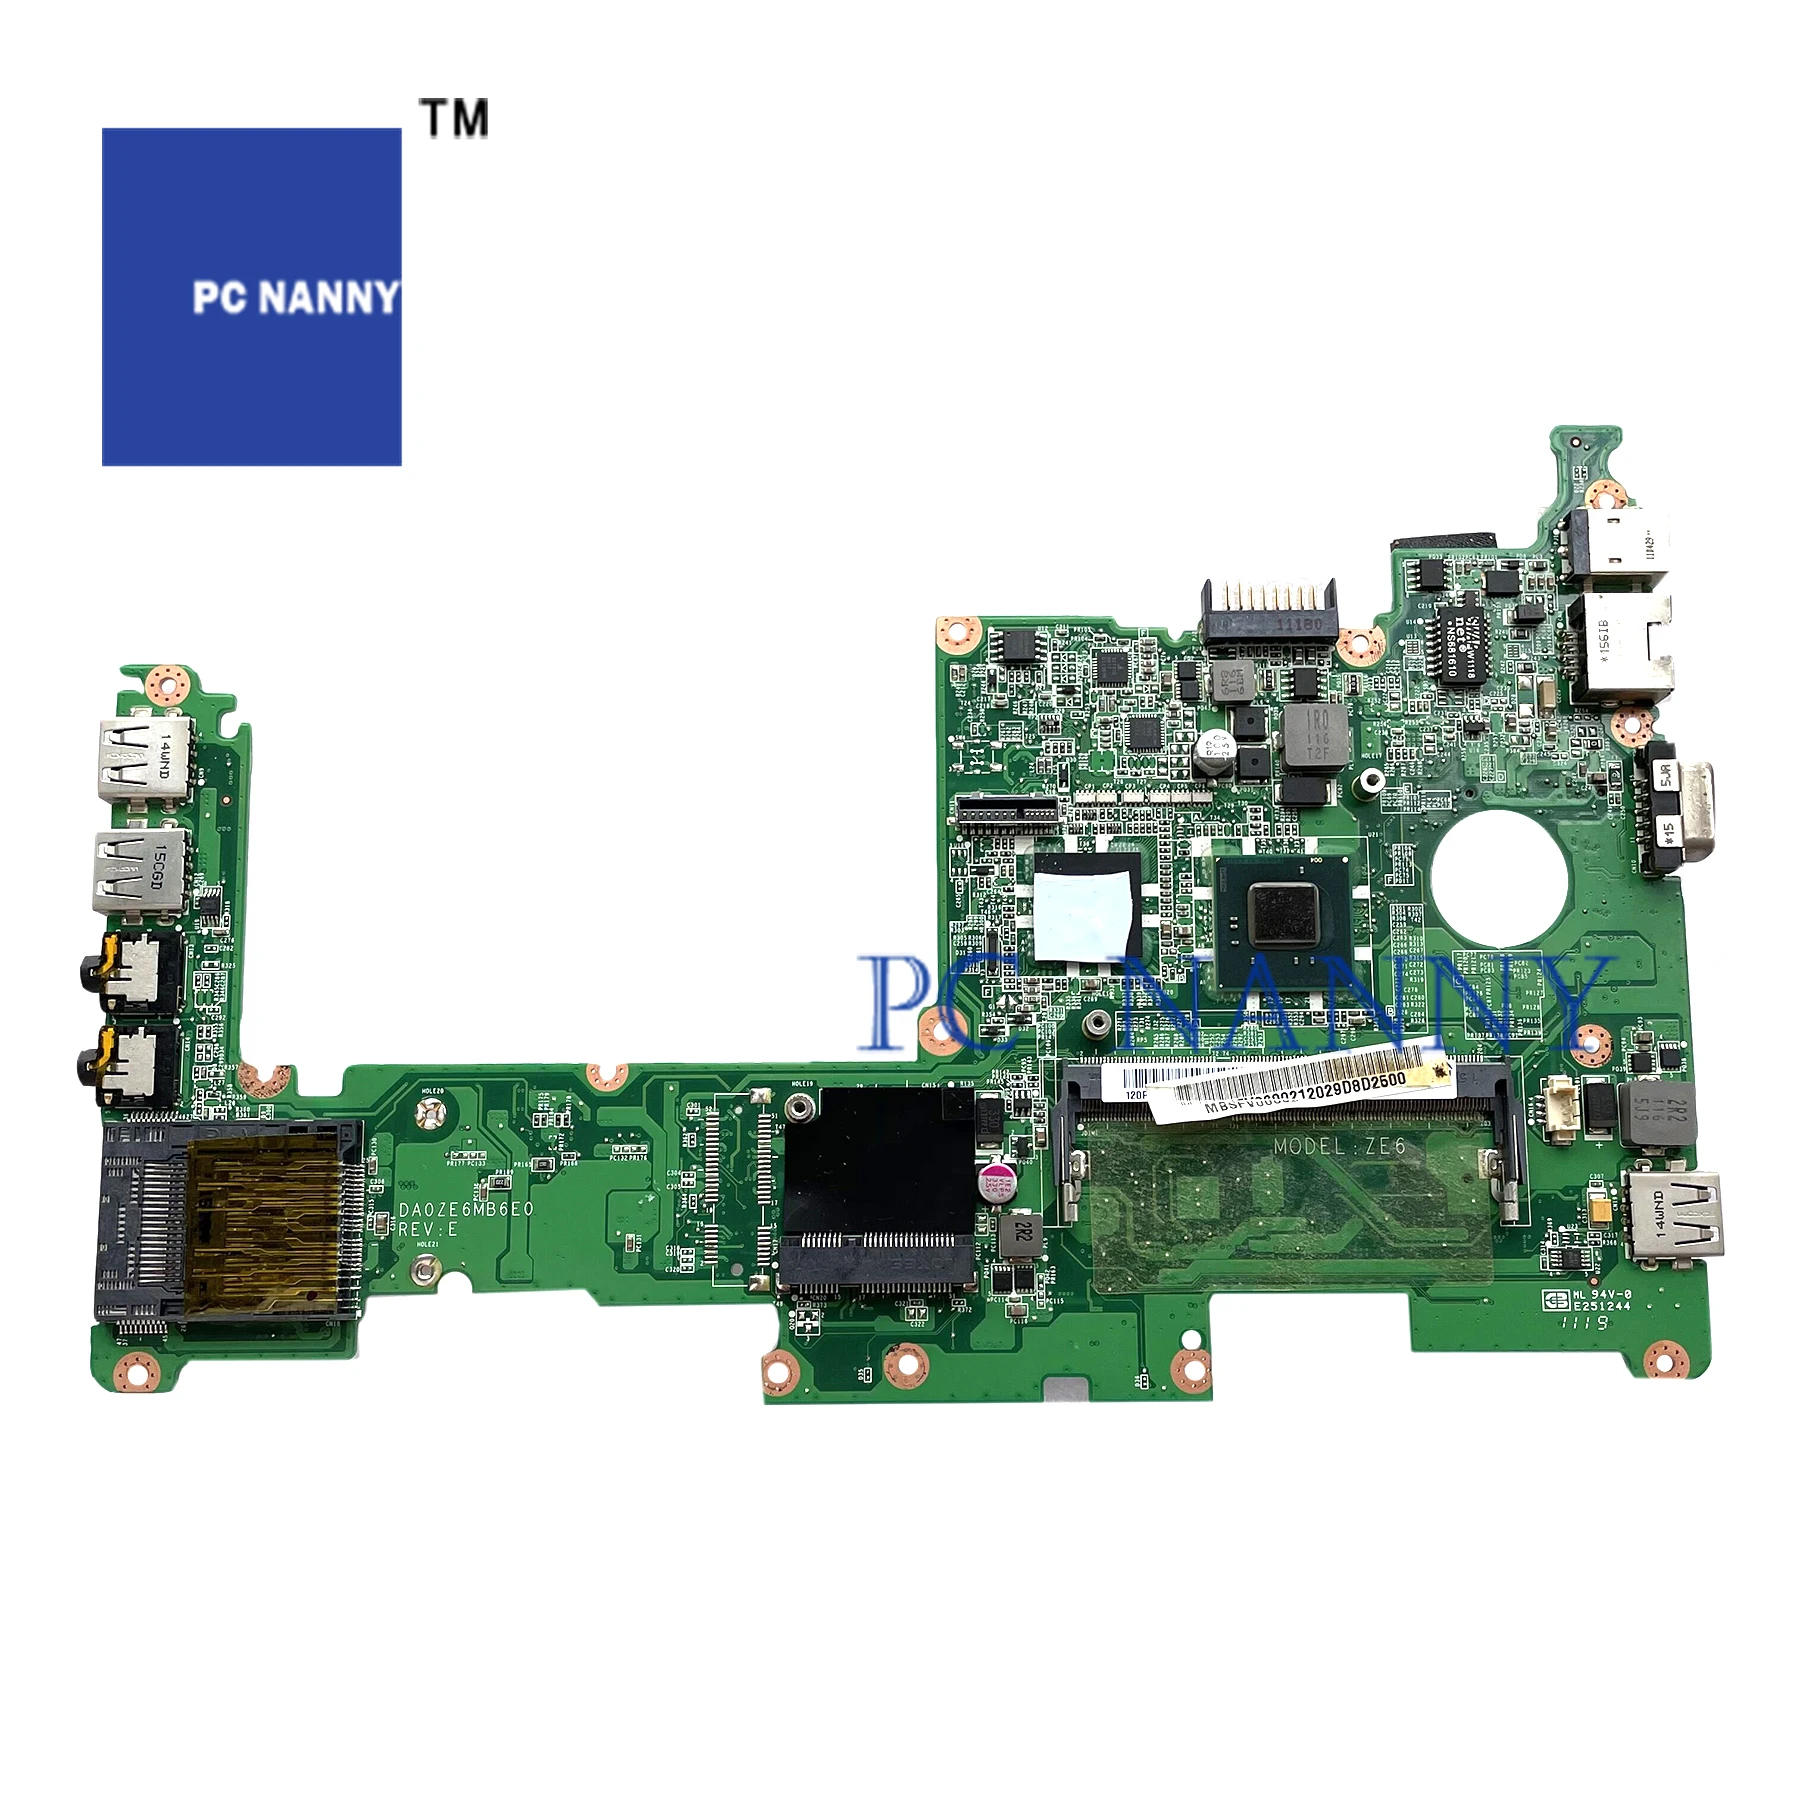 

PCNANNY FOR Acer Aspire One D257 Laptop System Motherboard Atom N570 MBSFW06002 DA0ZE6MB6E0 DDR3 Tested